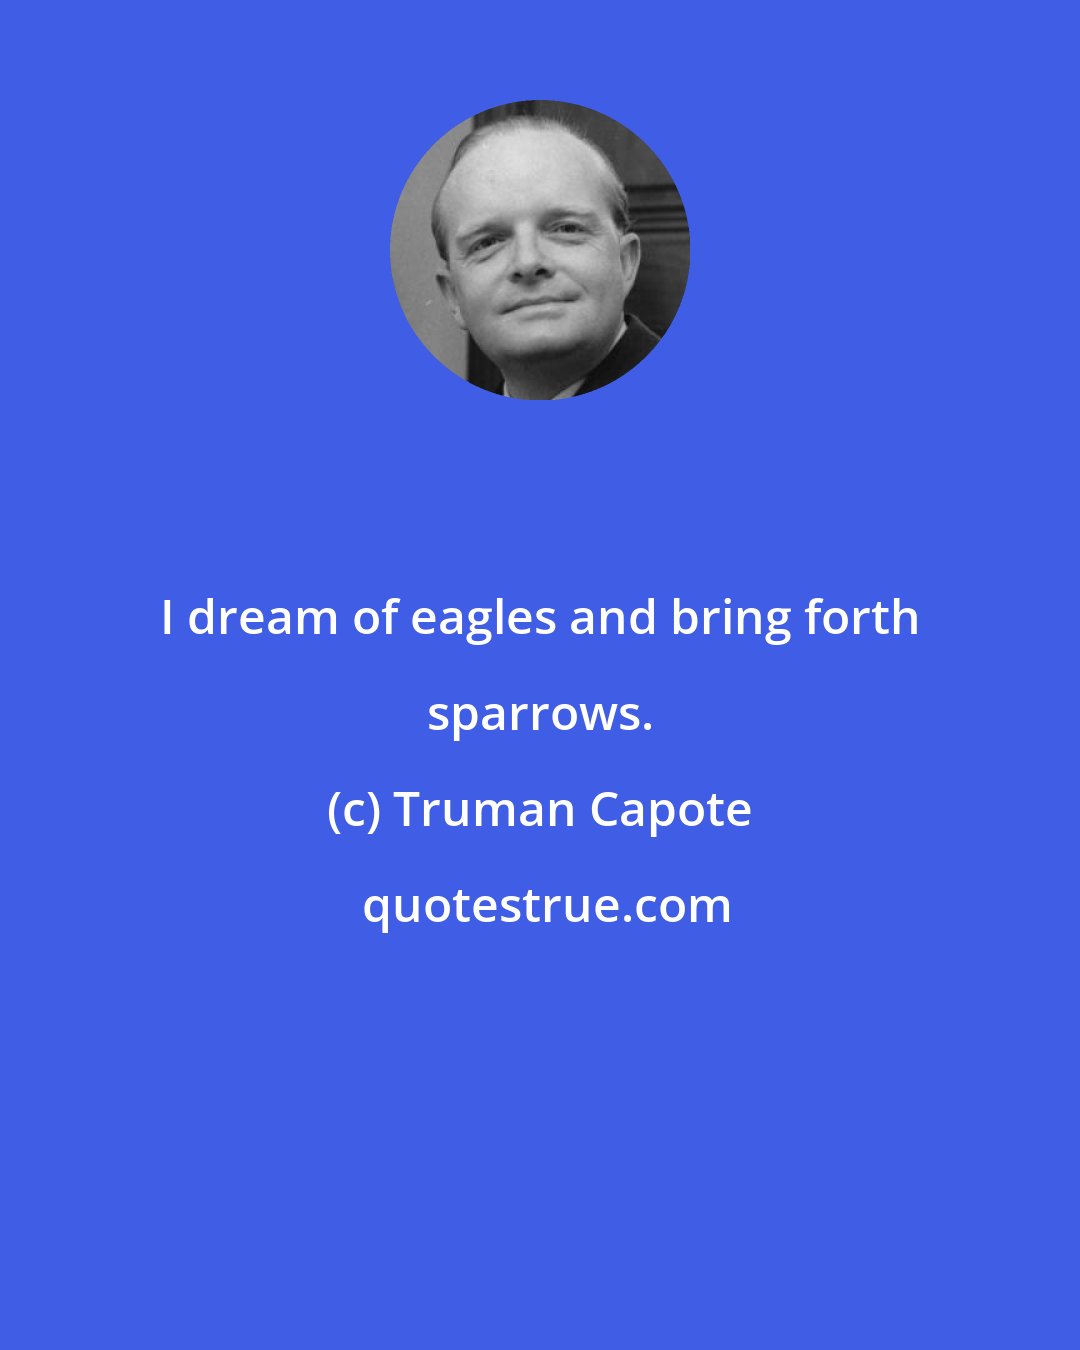 Truman Capote: I dream of eagles and bring forth sparrows.